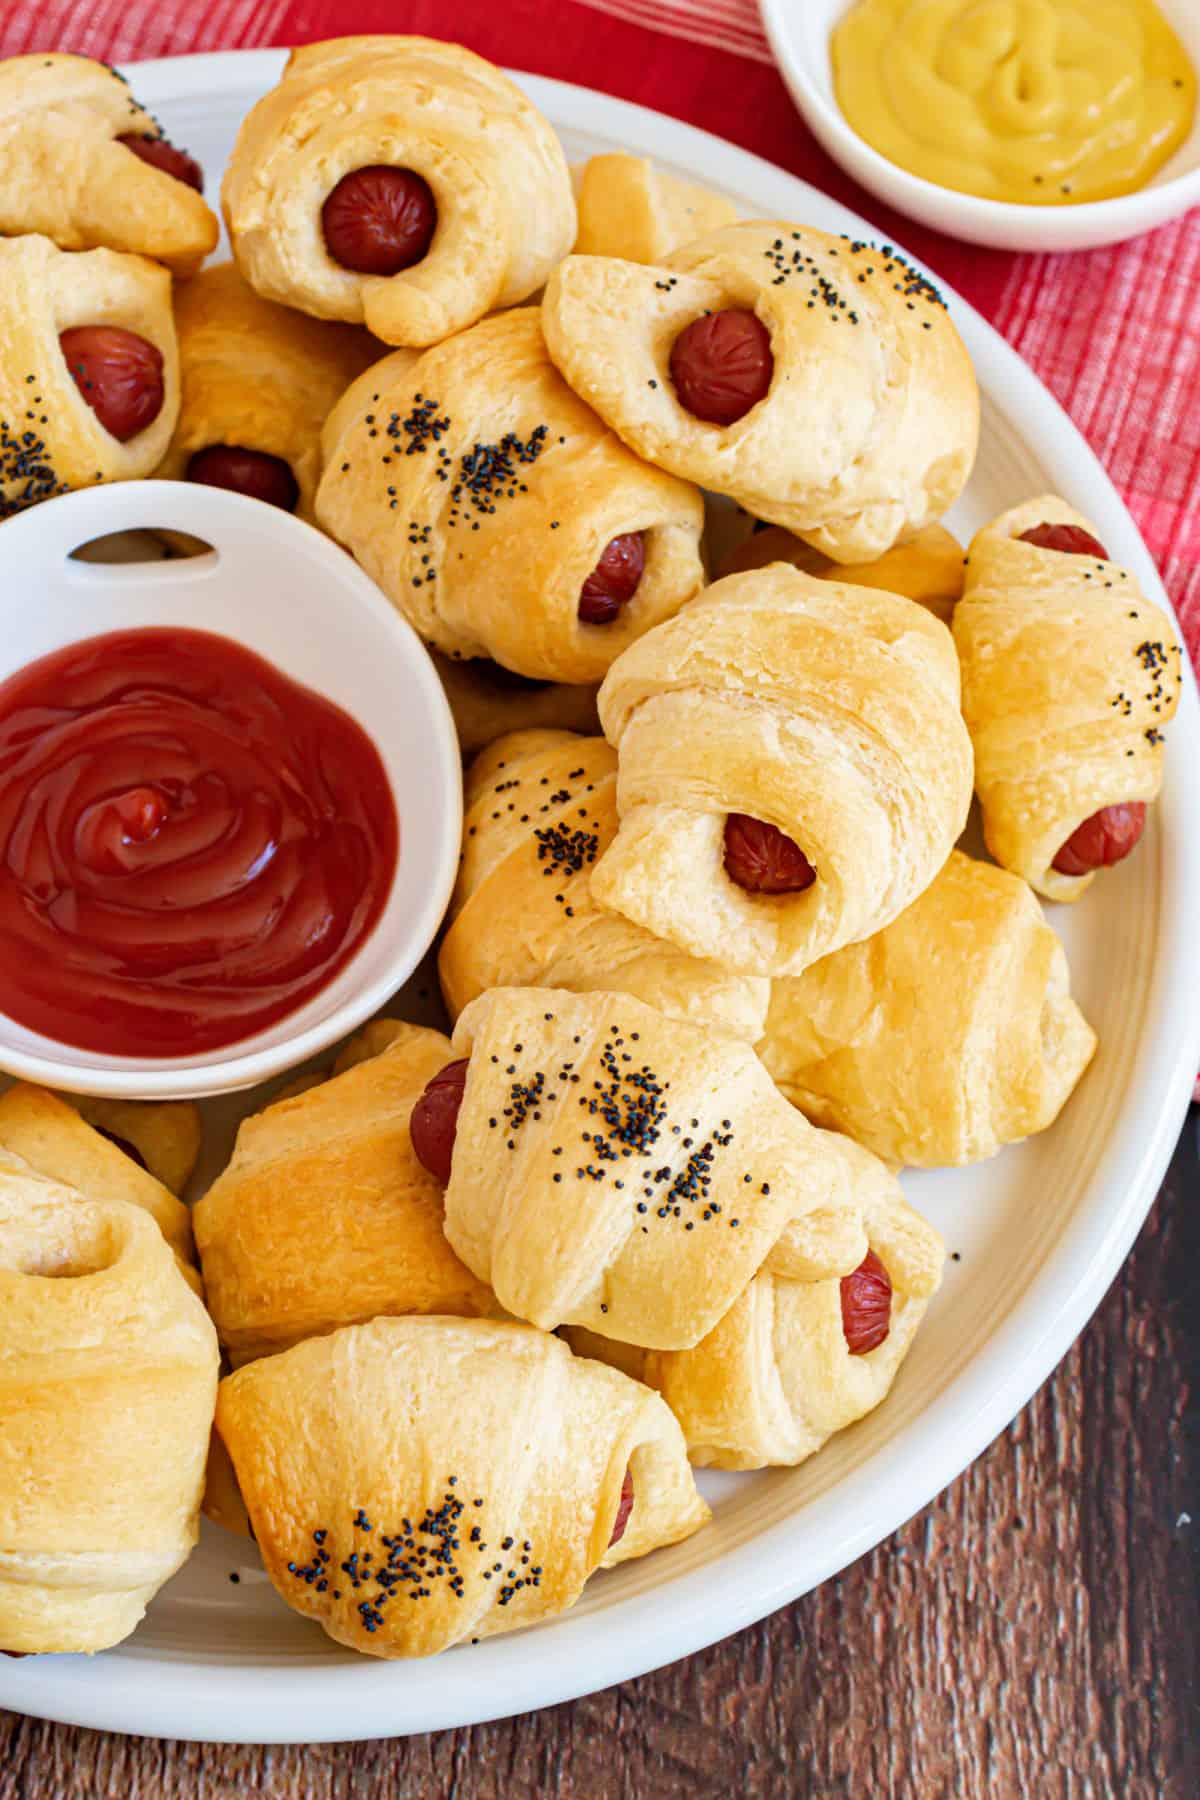 Pigs in a blanket on serving tray with dipping bowls of ketchup and mustard.